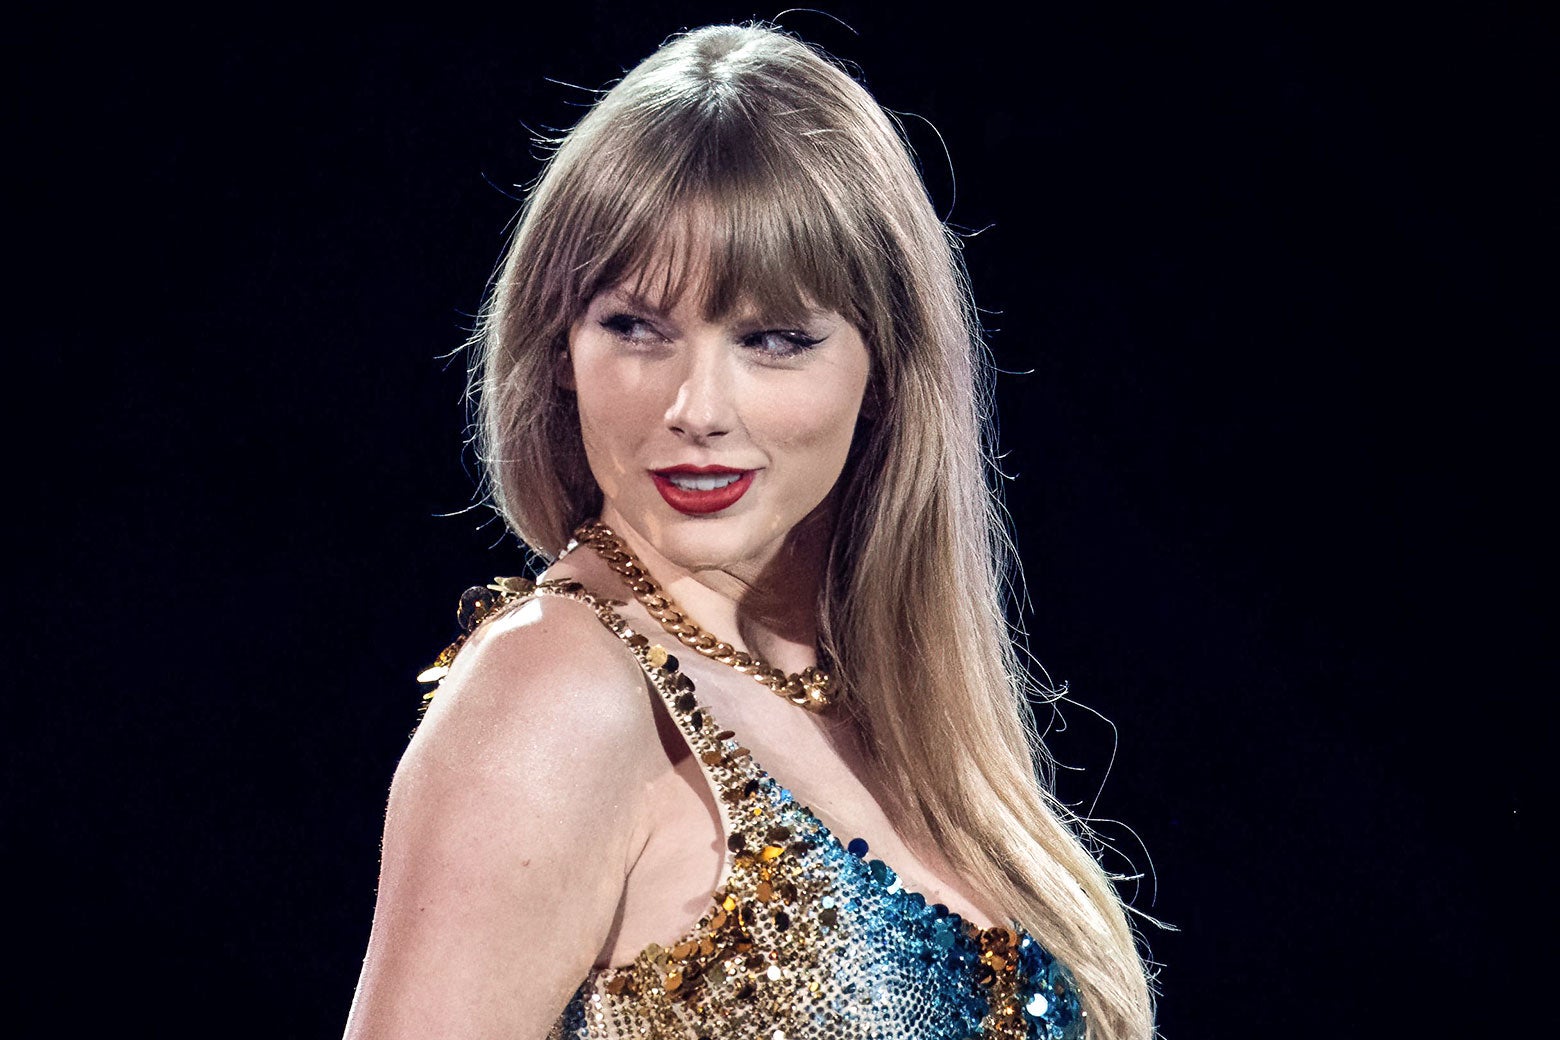 Better Than Revenge': Should Taylor Swift Alter Problematic Song